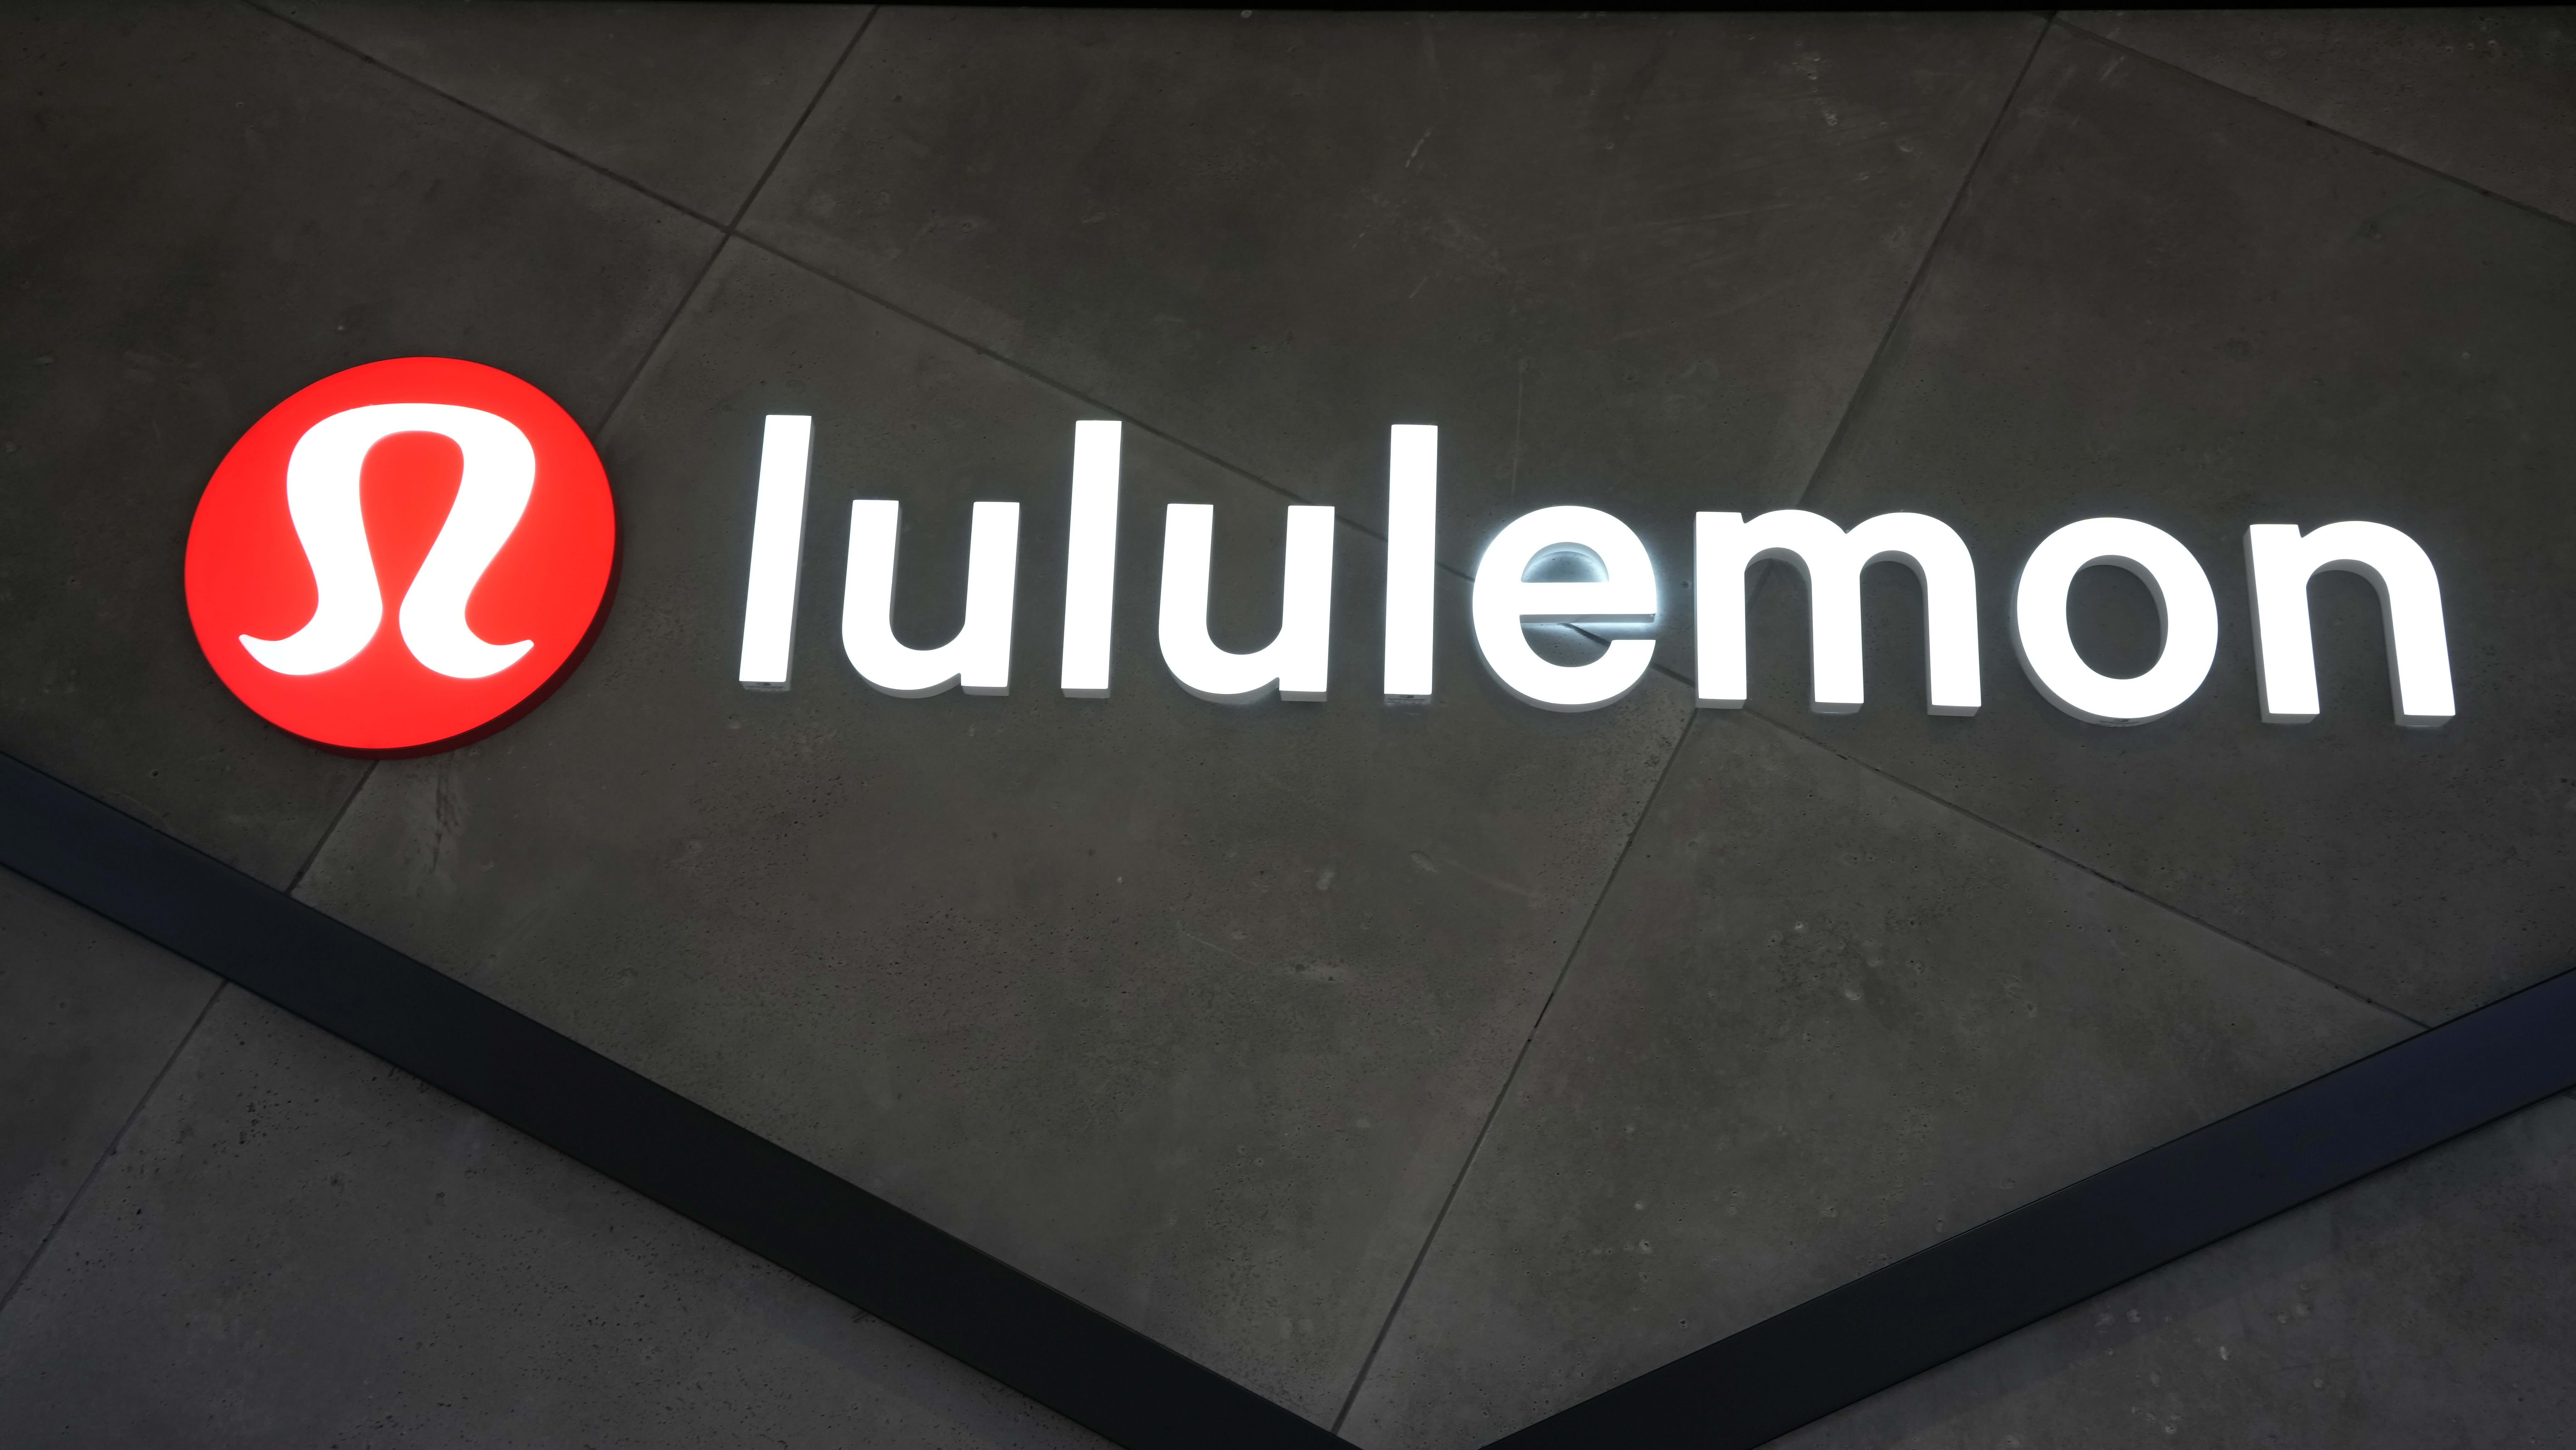 How Lululemon parlayed yoga pants into an entry to the S&P 500